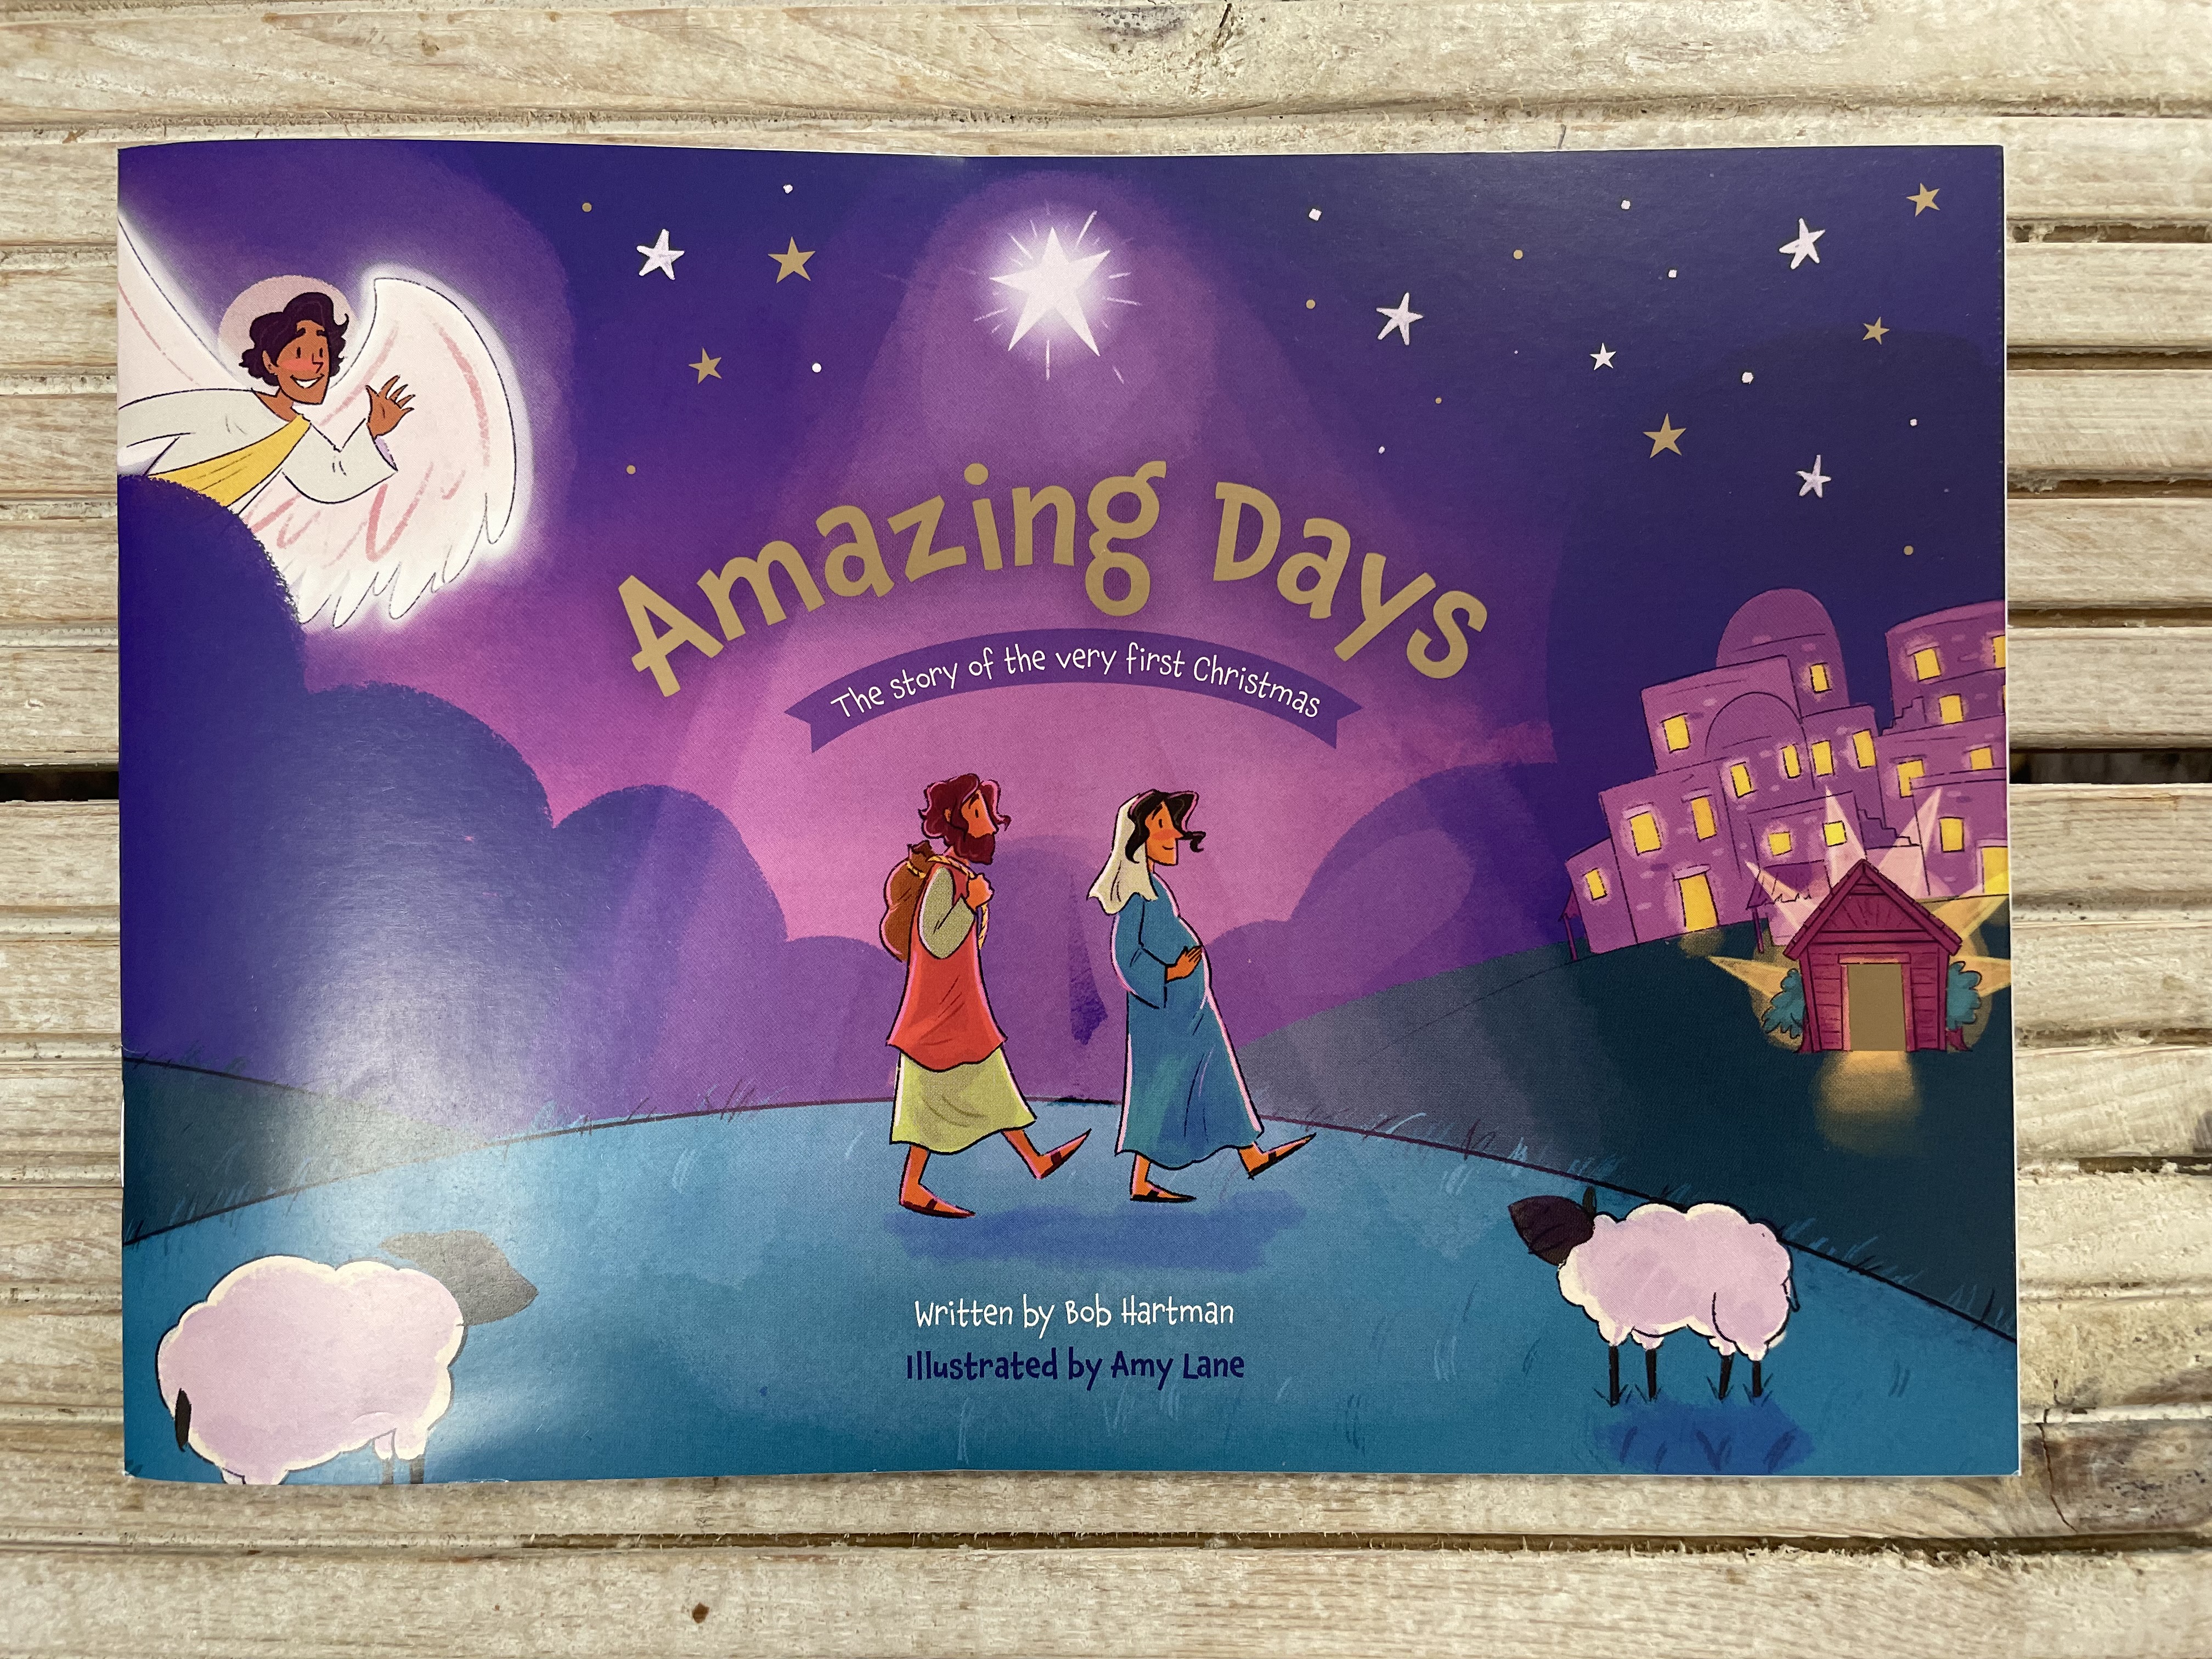 Amazing Days – The story of the very first Christmas